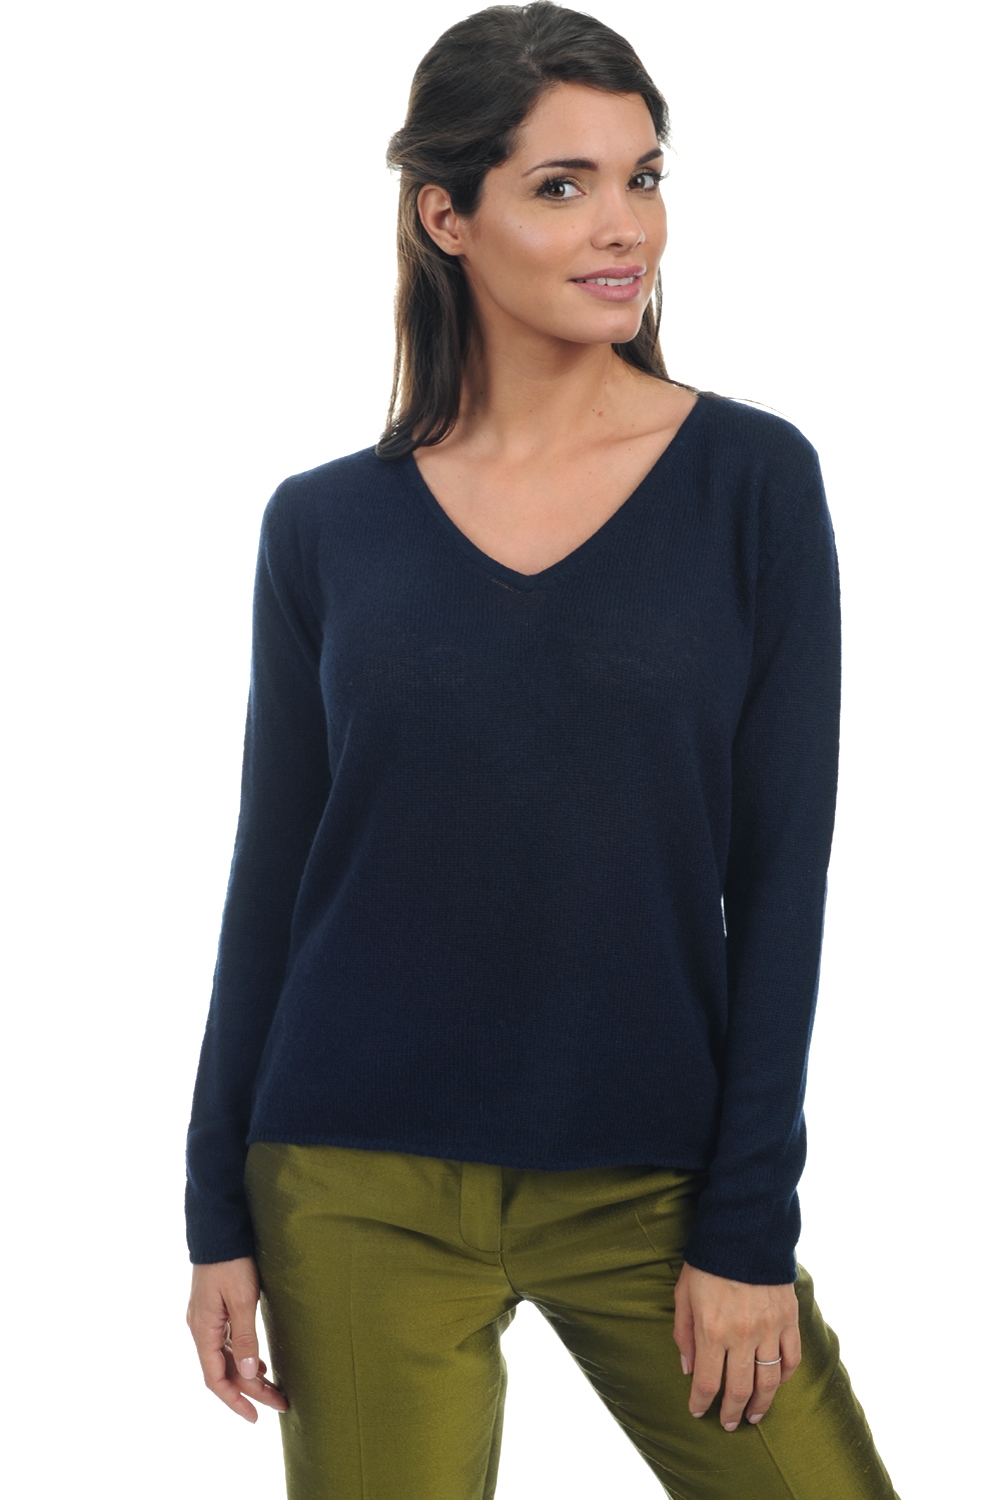 Cashmere ladies basic sweaters at low prices flavie dress blue m